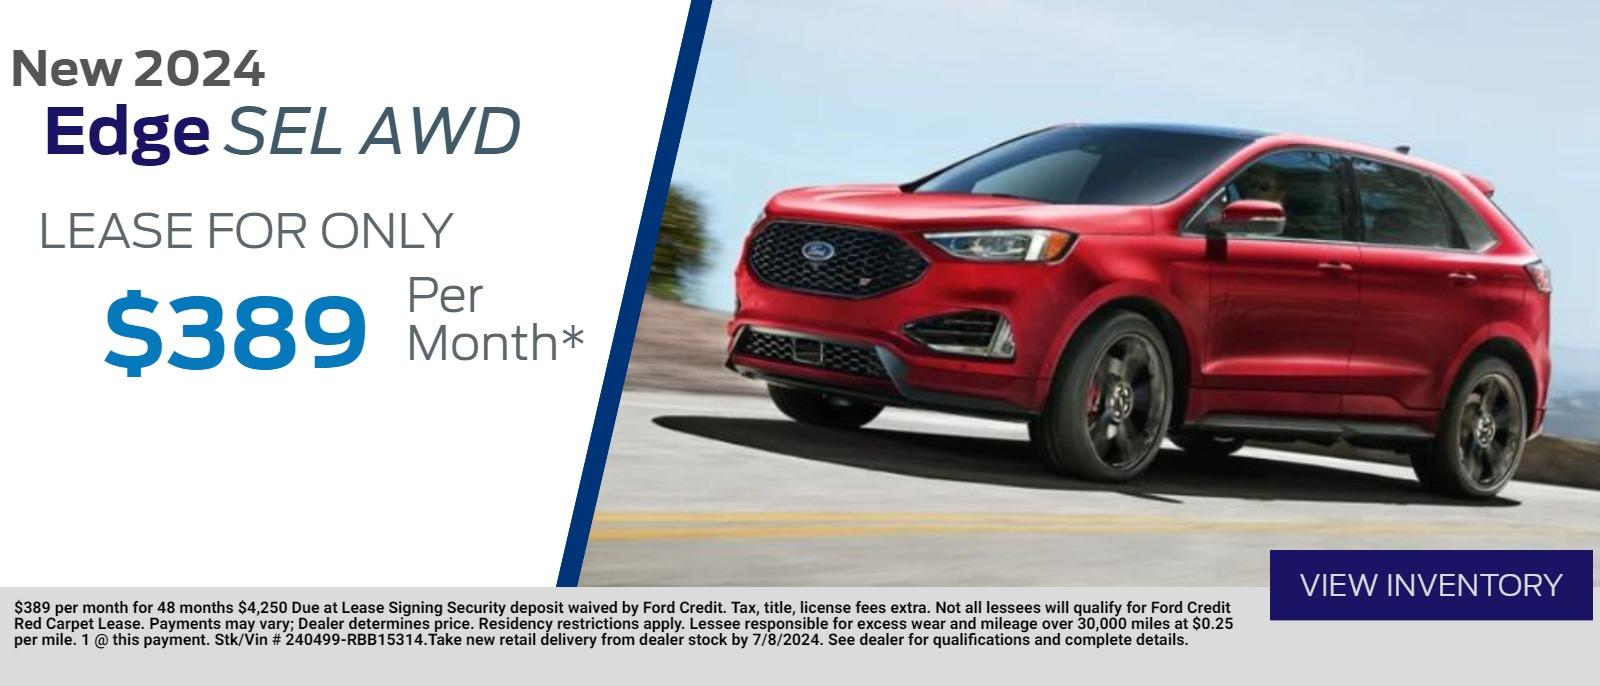 New 2024 
Edge SEL AWD           
Lease for Only

 $ 389   Per Month*
$389 per month for 48 months $4,250 Due at Lease Signing Security deposit waived by Ford Credit. Tax, title, license fees extra. Not all lessees will qualify for Ford Credit Red Carpet Lease. Payments may vary; Dealer determines price. Residency restrictions apply. Lessee responsible for excess wear and mileage over 30,000 miles at $0.25 per mile. 1 @ this payment. Stk/Vin # 240499-RBB15314.Take new retail delivery from dealer stock by 7/8/2024. See dealer for qualifications and complete details.